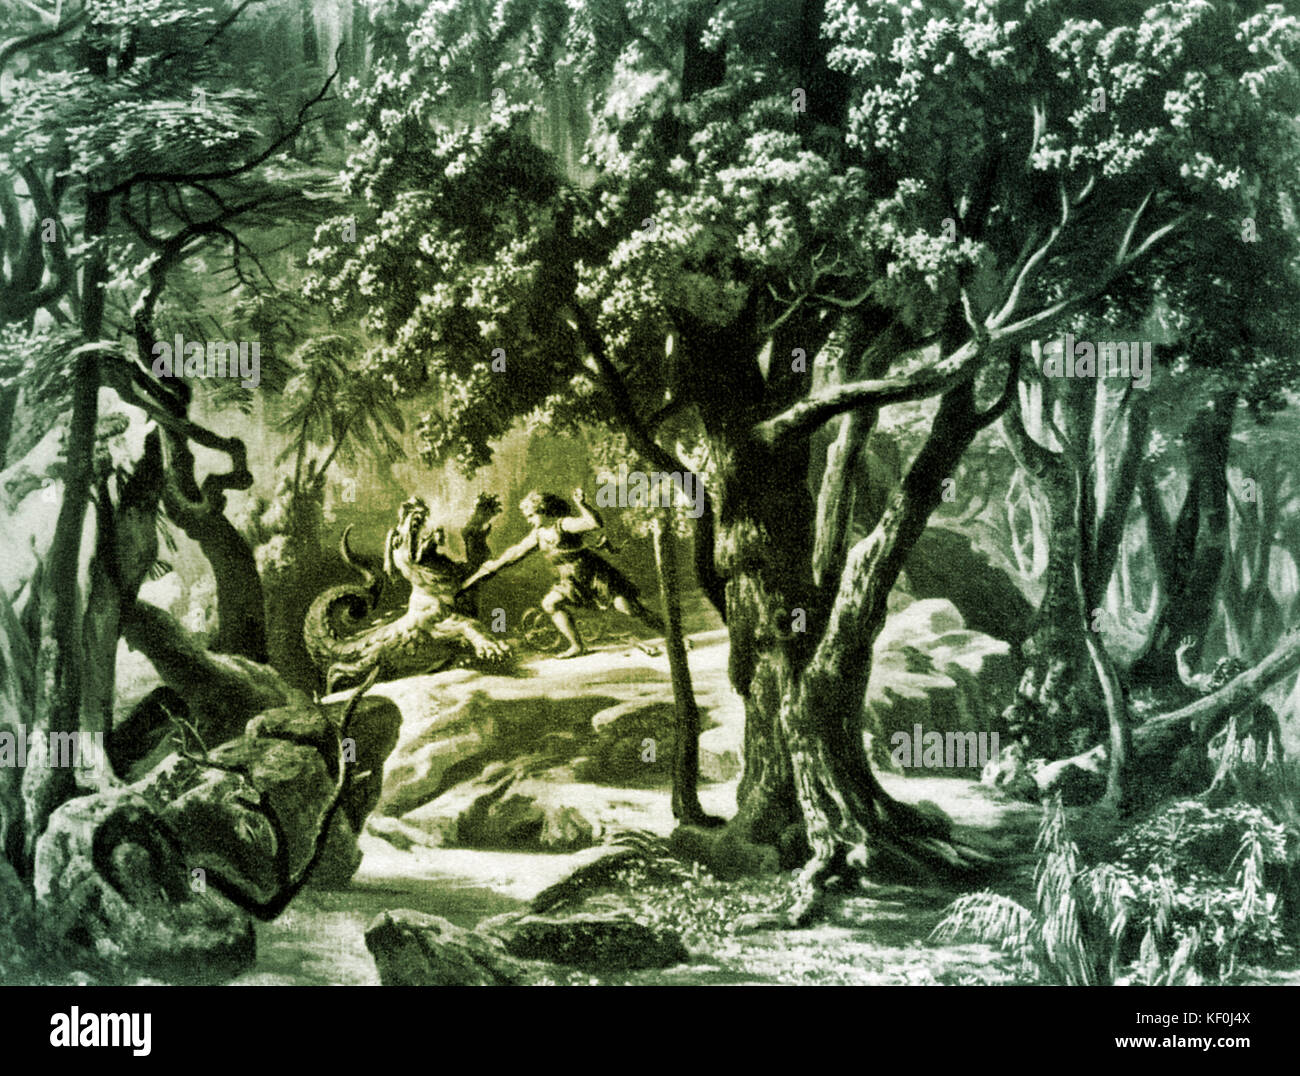 Siegfried by Richard Wagner. Set design by Josef Hoffmann. Caption: In the depths of the forest at Fafner's cave. RW: German composer & author, 22 May 1813 - 13 February 1883. Tinted version. Stock Photo